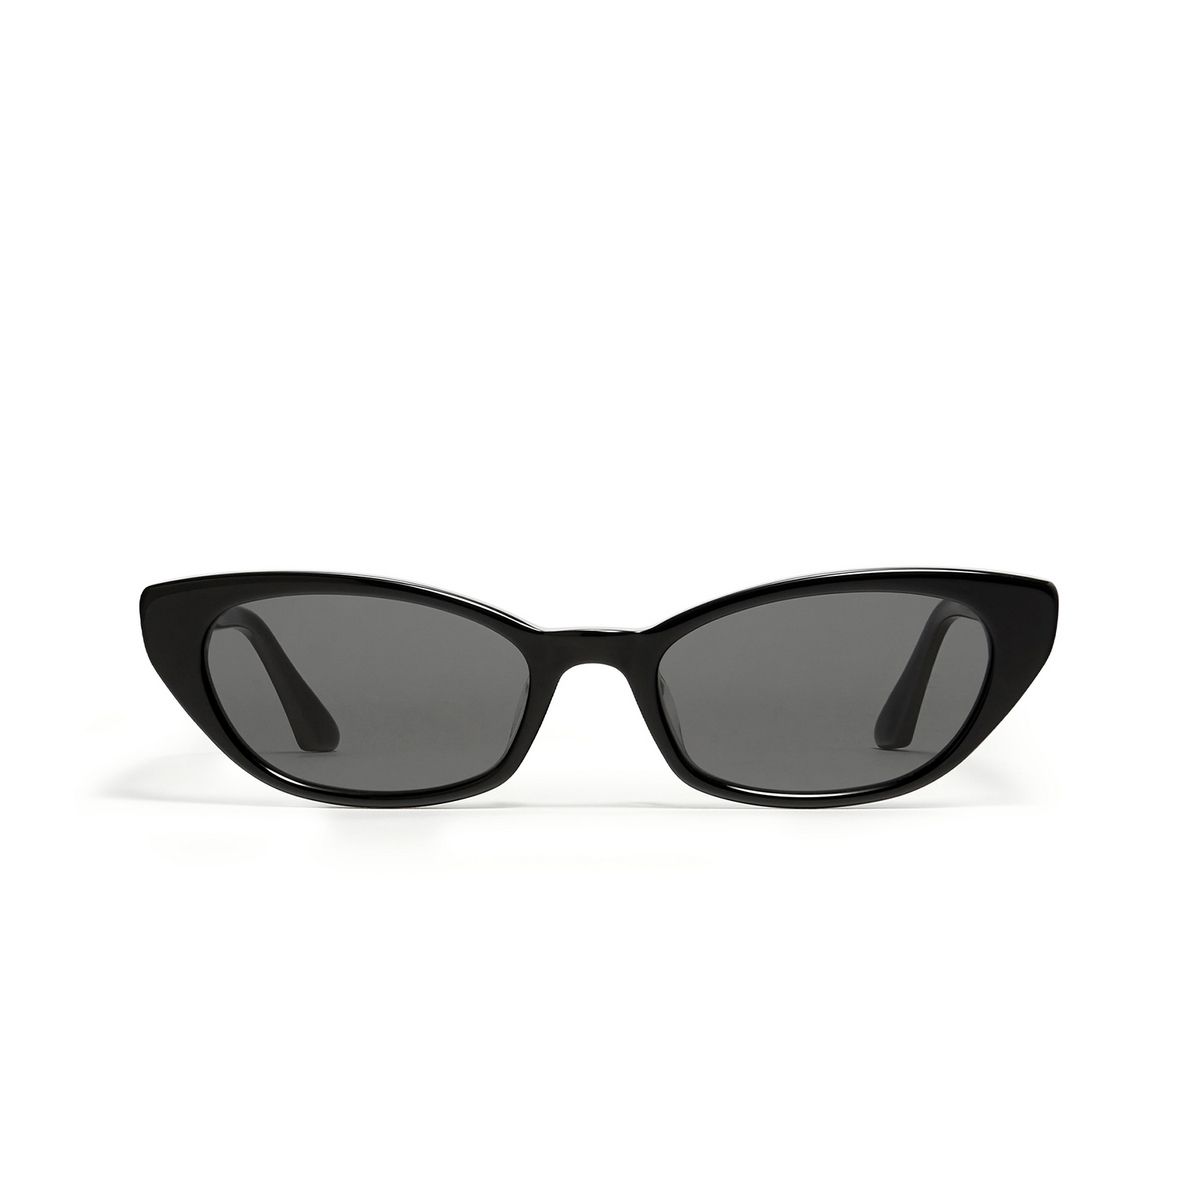 Gentle Monster® Oval Sunglasses: Pesh color Black 01 - front view.